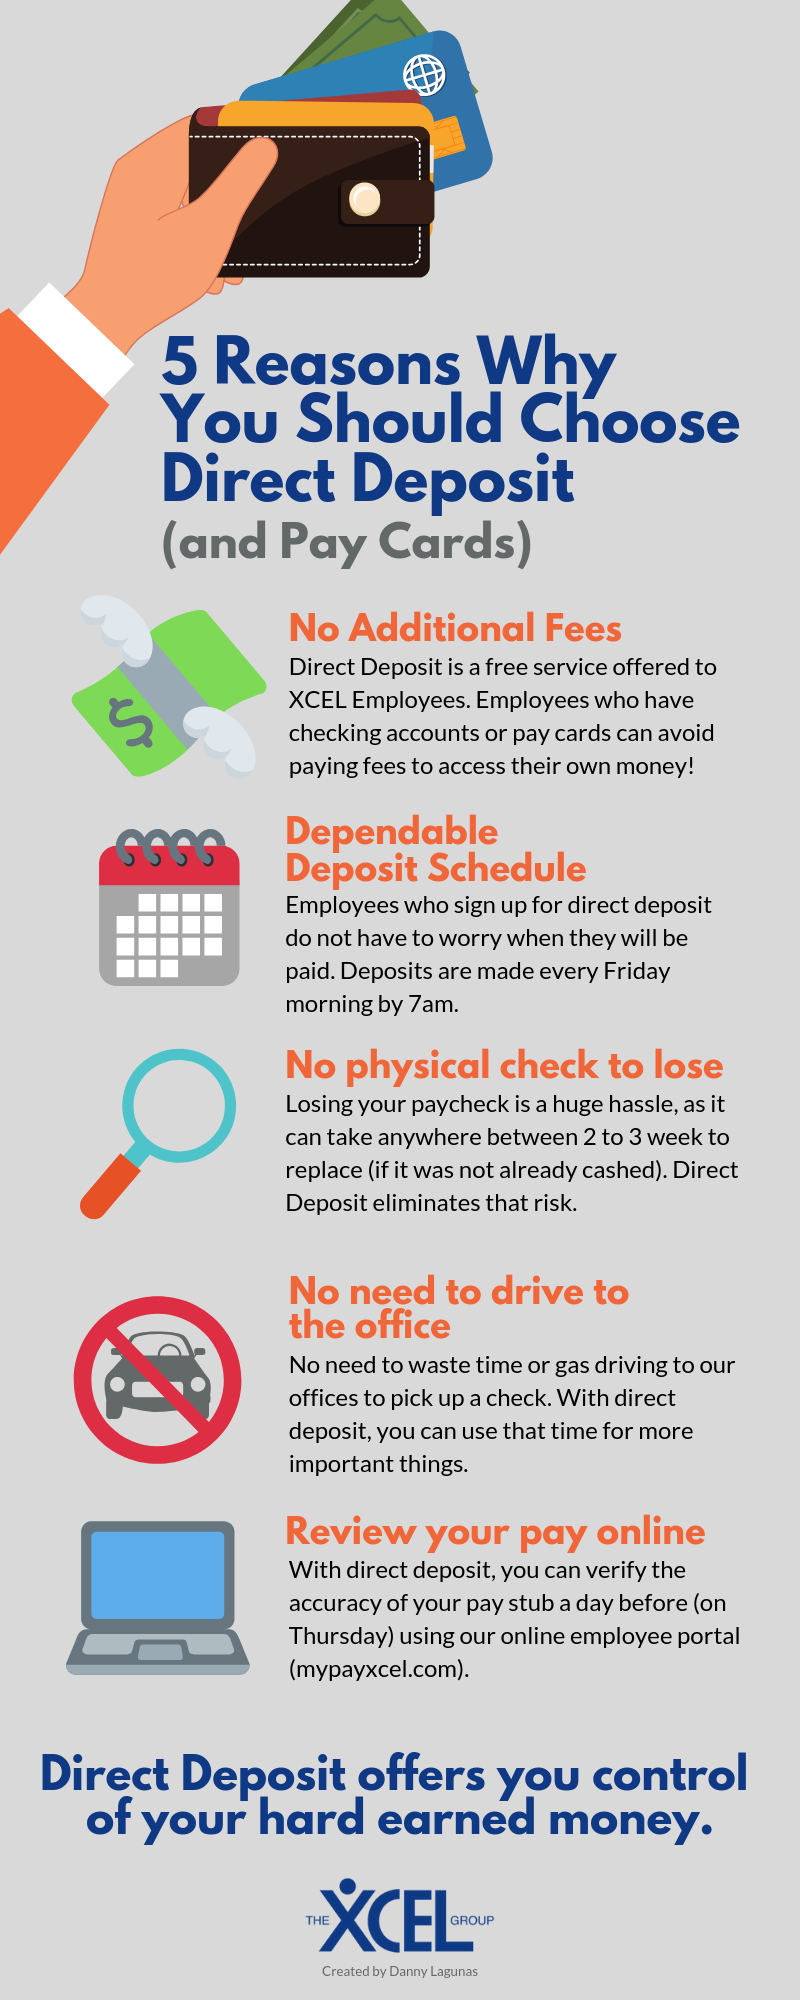 Why should I pay a deposit?